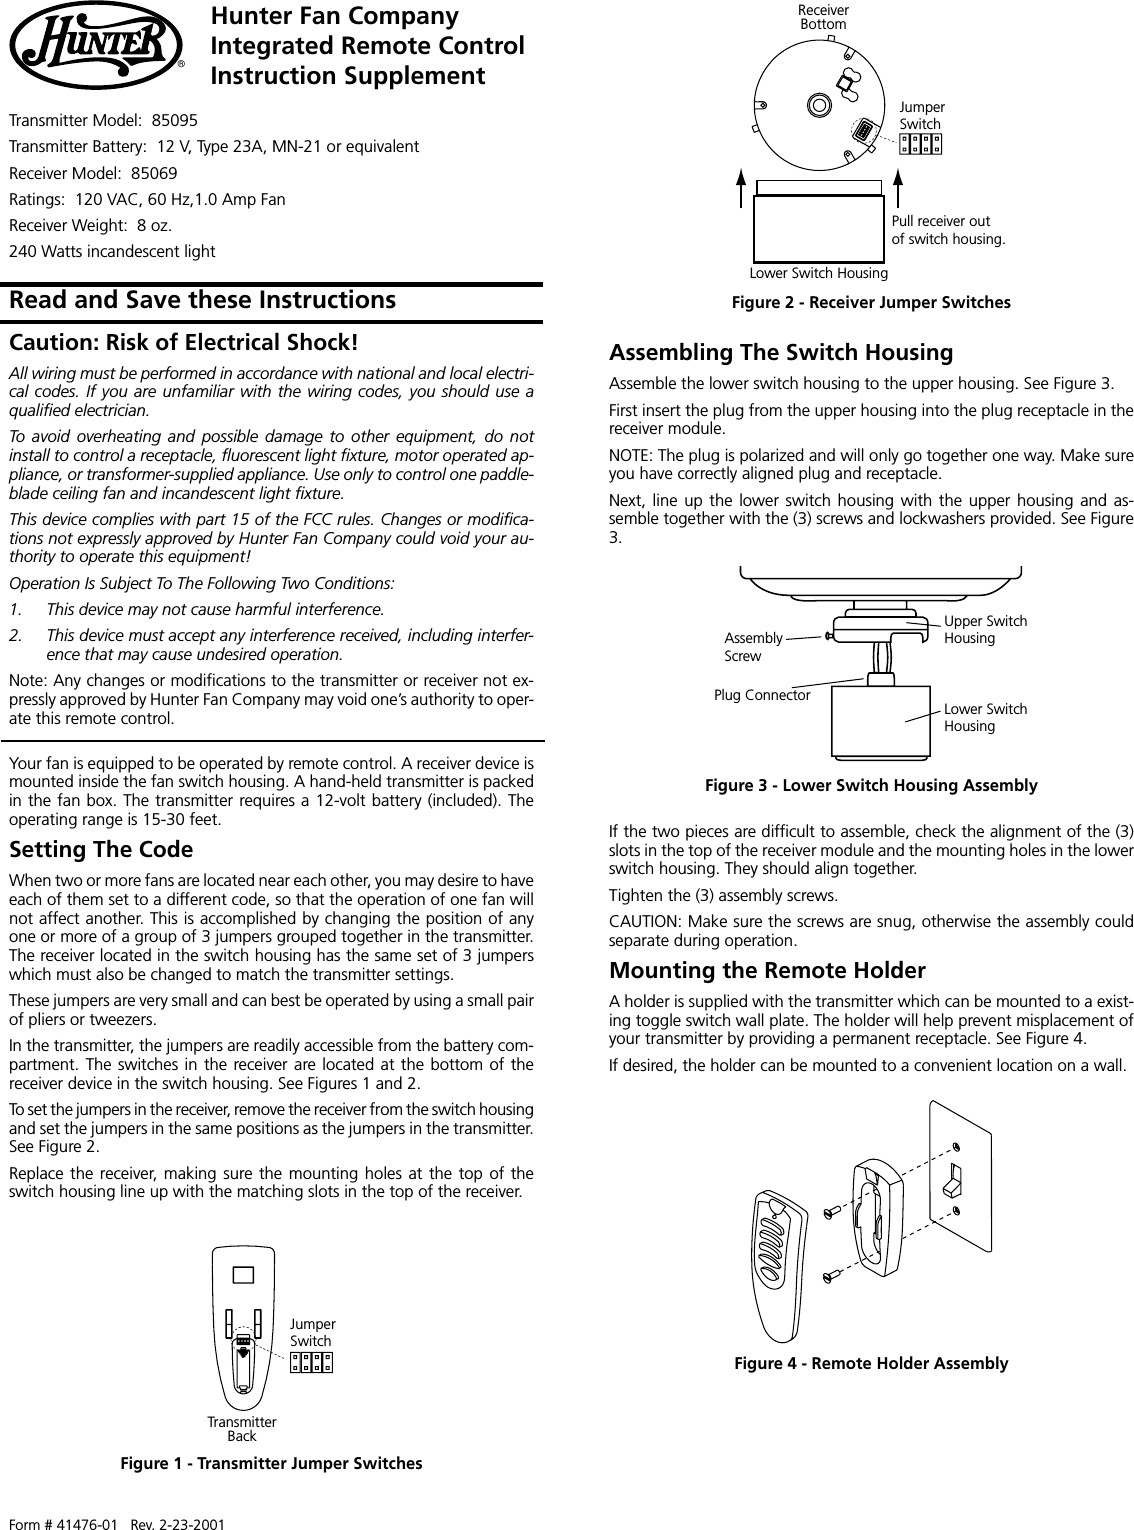 Form # 41476-01   Rev. 2-23-2001Hunter Fan CompanyIntegrated Remote ControlInstruction Supplement®Transmitter Model:  85095Transmitter Battery:  12 V, Type 23A, MN-21 or equivalentReceiver Model:  85069Ratings:  120 VAC, 60 Hz,1.0 Amp FanReceiver Weight:  8 oz.240 Watts incandescent lightRead and Save these InstructionsYour fan is equipped to be operated by remote control. A receiver device ismounted inside the fan switch housing. A hand-held transmitter is packedin the fan box. The transmitter requires a 12-volt battery (included). Theoperating range is 15-30 feet.Setting The CodeWhen two or more fans are located near each other, you may desire to haveeach of them set to a different code, so that the operation of one fan willnot affect another. This is accomplished by changing the position of anyone or more of a group of 3 jumpers grouped together in the transmitter.The receiver located in the switch housing has the same set of 3 jumperswhich must also be changed to match the transmitter settings.These jumpers are very small and can best be operated by using a small pairof pliers or tweezers.In the transmitter, the jumpers are readily accessible from the battery com-partment. The switches in the receiver are located at the bottom of thereceiver device in the switch housing. See Figures 1 and 2.To set the jumpers in the receiver, remove the receiver from the switch housingand set the jumpers in the same positions as the jumpers in the transmitter.See Figure 2.Replace the receiver, making sure the mounting holes at the top of theswitch housing line up with the matching slots in the top of the receiver.Figure 4 - Remote Holder AssemblyJumperSwitchTransmitterBackFigure 1 - Transmitter Jumper SwitchesFigure 2 - Receiver Jumper SwitchesUpper SwitchHousingLower SwitchHousingPlug ConnectorAssemblyScrewFigure 3 - Lower Switch Housing AssemblyIf the two pieces are difficult to assemble, check the alignment of the (3)slots in the top of the receiver module and the mounting holes in the lowerswitch housing. They should align together.Tighten the (3) assembly screws.CAUTION: Make sure the screws are snug, otherwise the assembly couldseparate during operation.Mounting the Remote HolderA holder is supplied with the transmitter which can be mounted to a exist-ing toggle switch wall plate. The holder will help prevent misplacement ofyour transmitter by providing a permanent receptacle. See Figure 4.If desired, the holder can be mounted to a convenient location on a wall.Assembling The Switch HousingAssemble the lower switch housing to the upper housing. See Figure 3.First insert the plug from the upper housing into the plug receptacle in thereceiver module.NOTE: The plug is polarized and will only go together one way. Make sureyou have correctly aligned plug and receptacle.Next, line  up  the  lower  switch  housing with the upper housing and as-semble together with the (3) screws and lockwashers provided. See Figure3.JumperSwitchReceiverBottomLower Switch HousingPull receiver outof switch housing.Caution: Risk of Electrical Shock!All wiring must be performed in accordance with national and local electri-cal codes. If you  are unfamiliar with the  wiring codes, you  should use aqualified electrician.To  avoid  overheating  and  possible  damage  to  other  equipment,  do  notinstall to control a receptacle, fluorescent light fixture, motor operated ap-pliance, or transformer-supplied appliance. Use only to control one paddle-blade ceiling fan and incandescent light fixture.This device complies with part 15 of the FCC rules. Changes or modifica-tions not expressly approved by Hunter Fan Company could void your au-thority to operate this equipment!Operation Is Subject To The Following Two Conditions:1. This device may not cause harmful interference.2. This device must accept any interference received, including interfer-ence that may cause undesired operation.Note: Any changes or modifications to the transmitter or receiver not ex-pressly approved by Hunter Fan Company may void one’s authority to oper-ate this remote control.